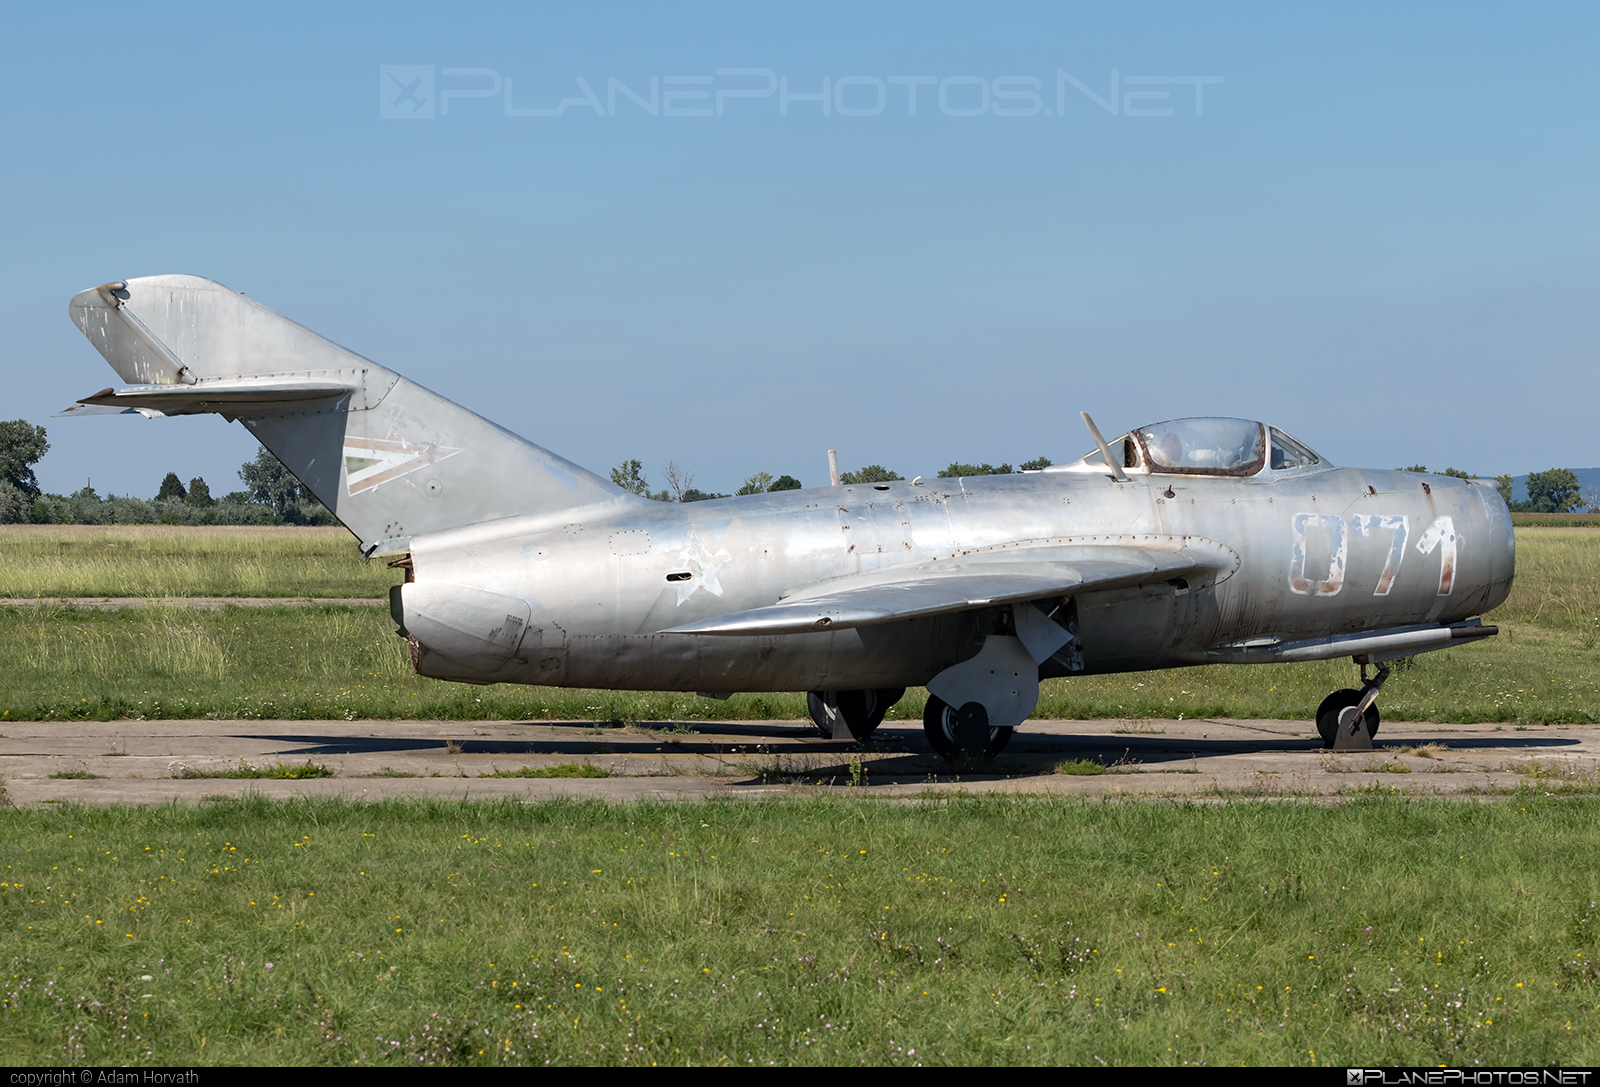 Mikoyan-Gurevich MiG-15bis - 071 operated by Magyar Néphadsereg (Hungarian People's Army) #hungarianpeoplesarmy #magyarnephadsereg #mig #mig15 #mig15bis #mikoyangurevich